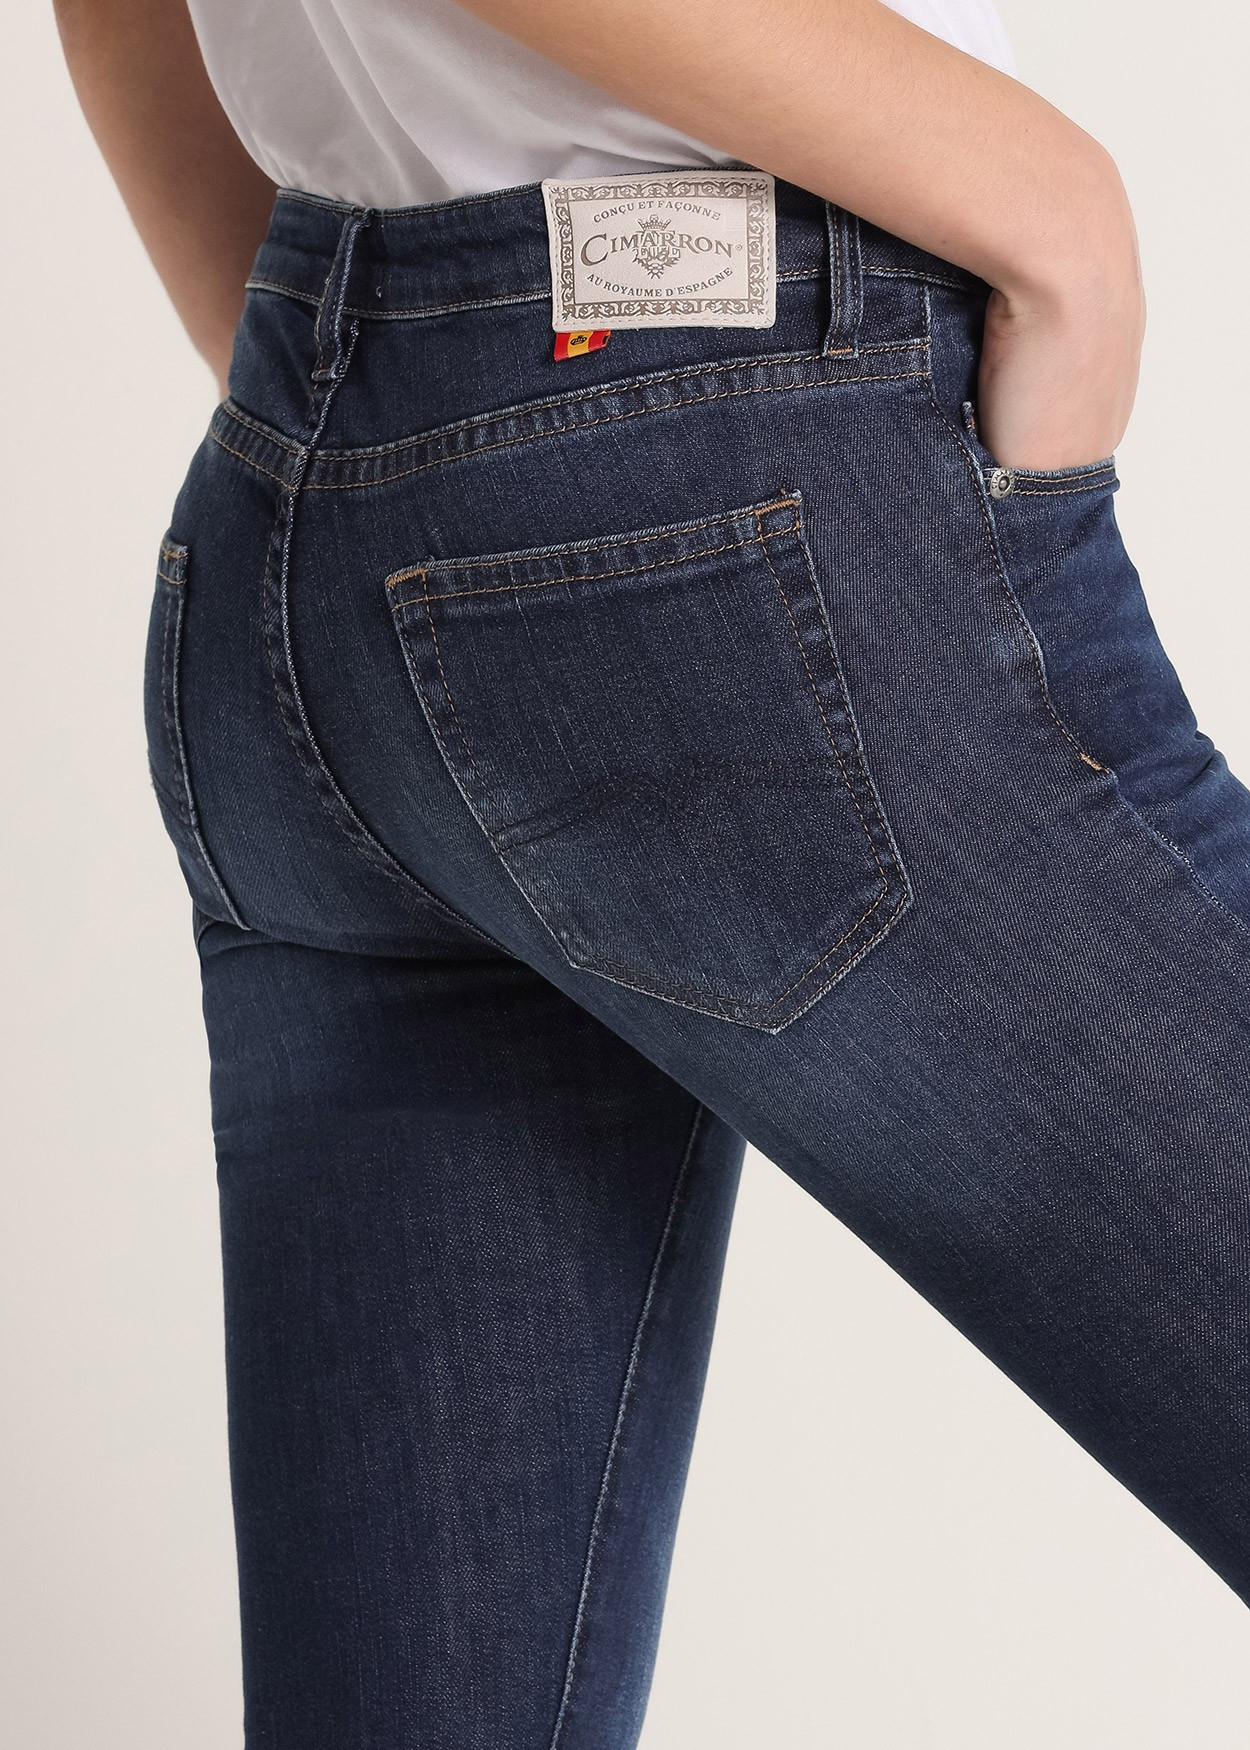 ENYA KYRA - Jeans | Taille Basse| Skinny Ankle Fit | Taille en pouces Cimarron